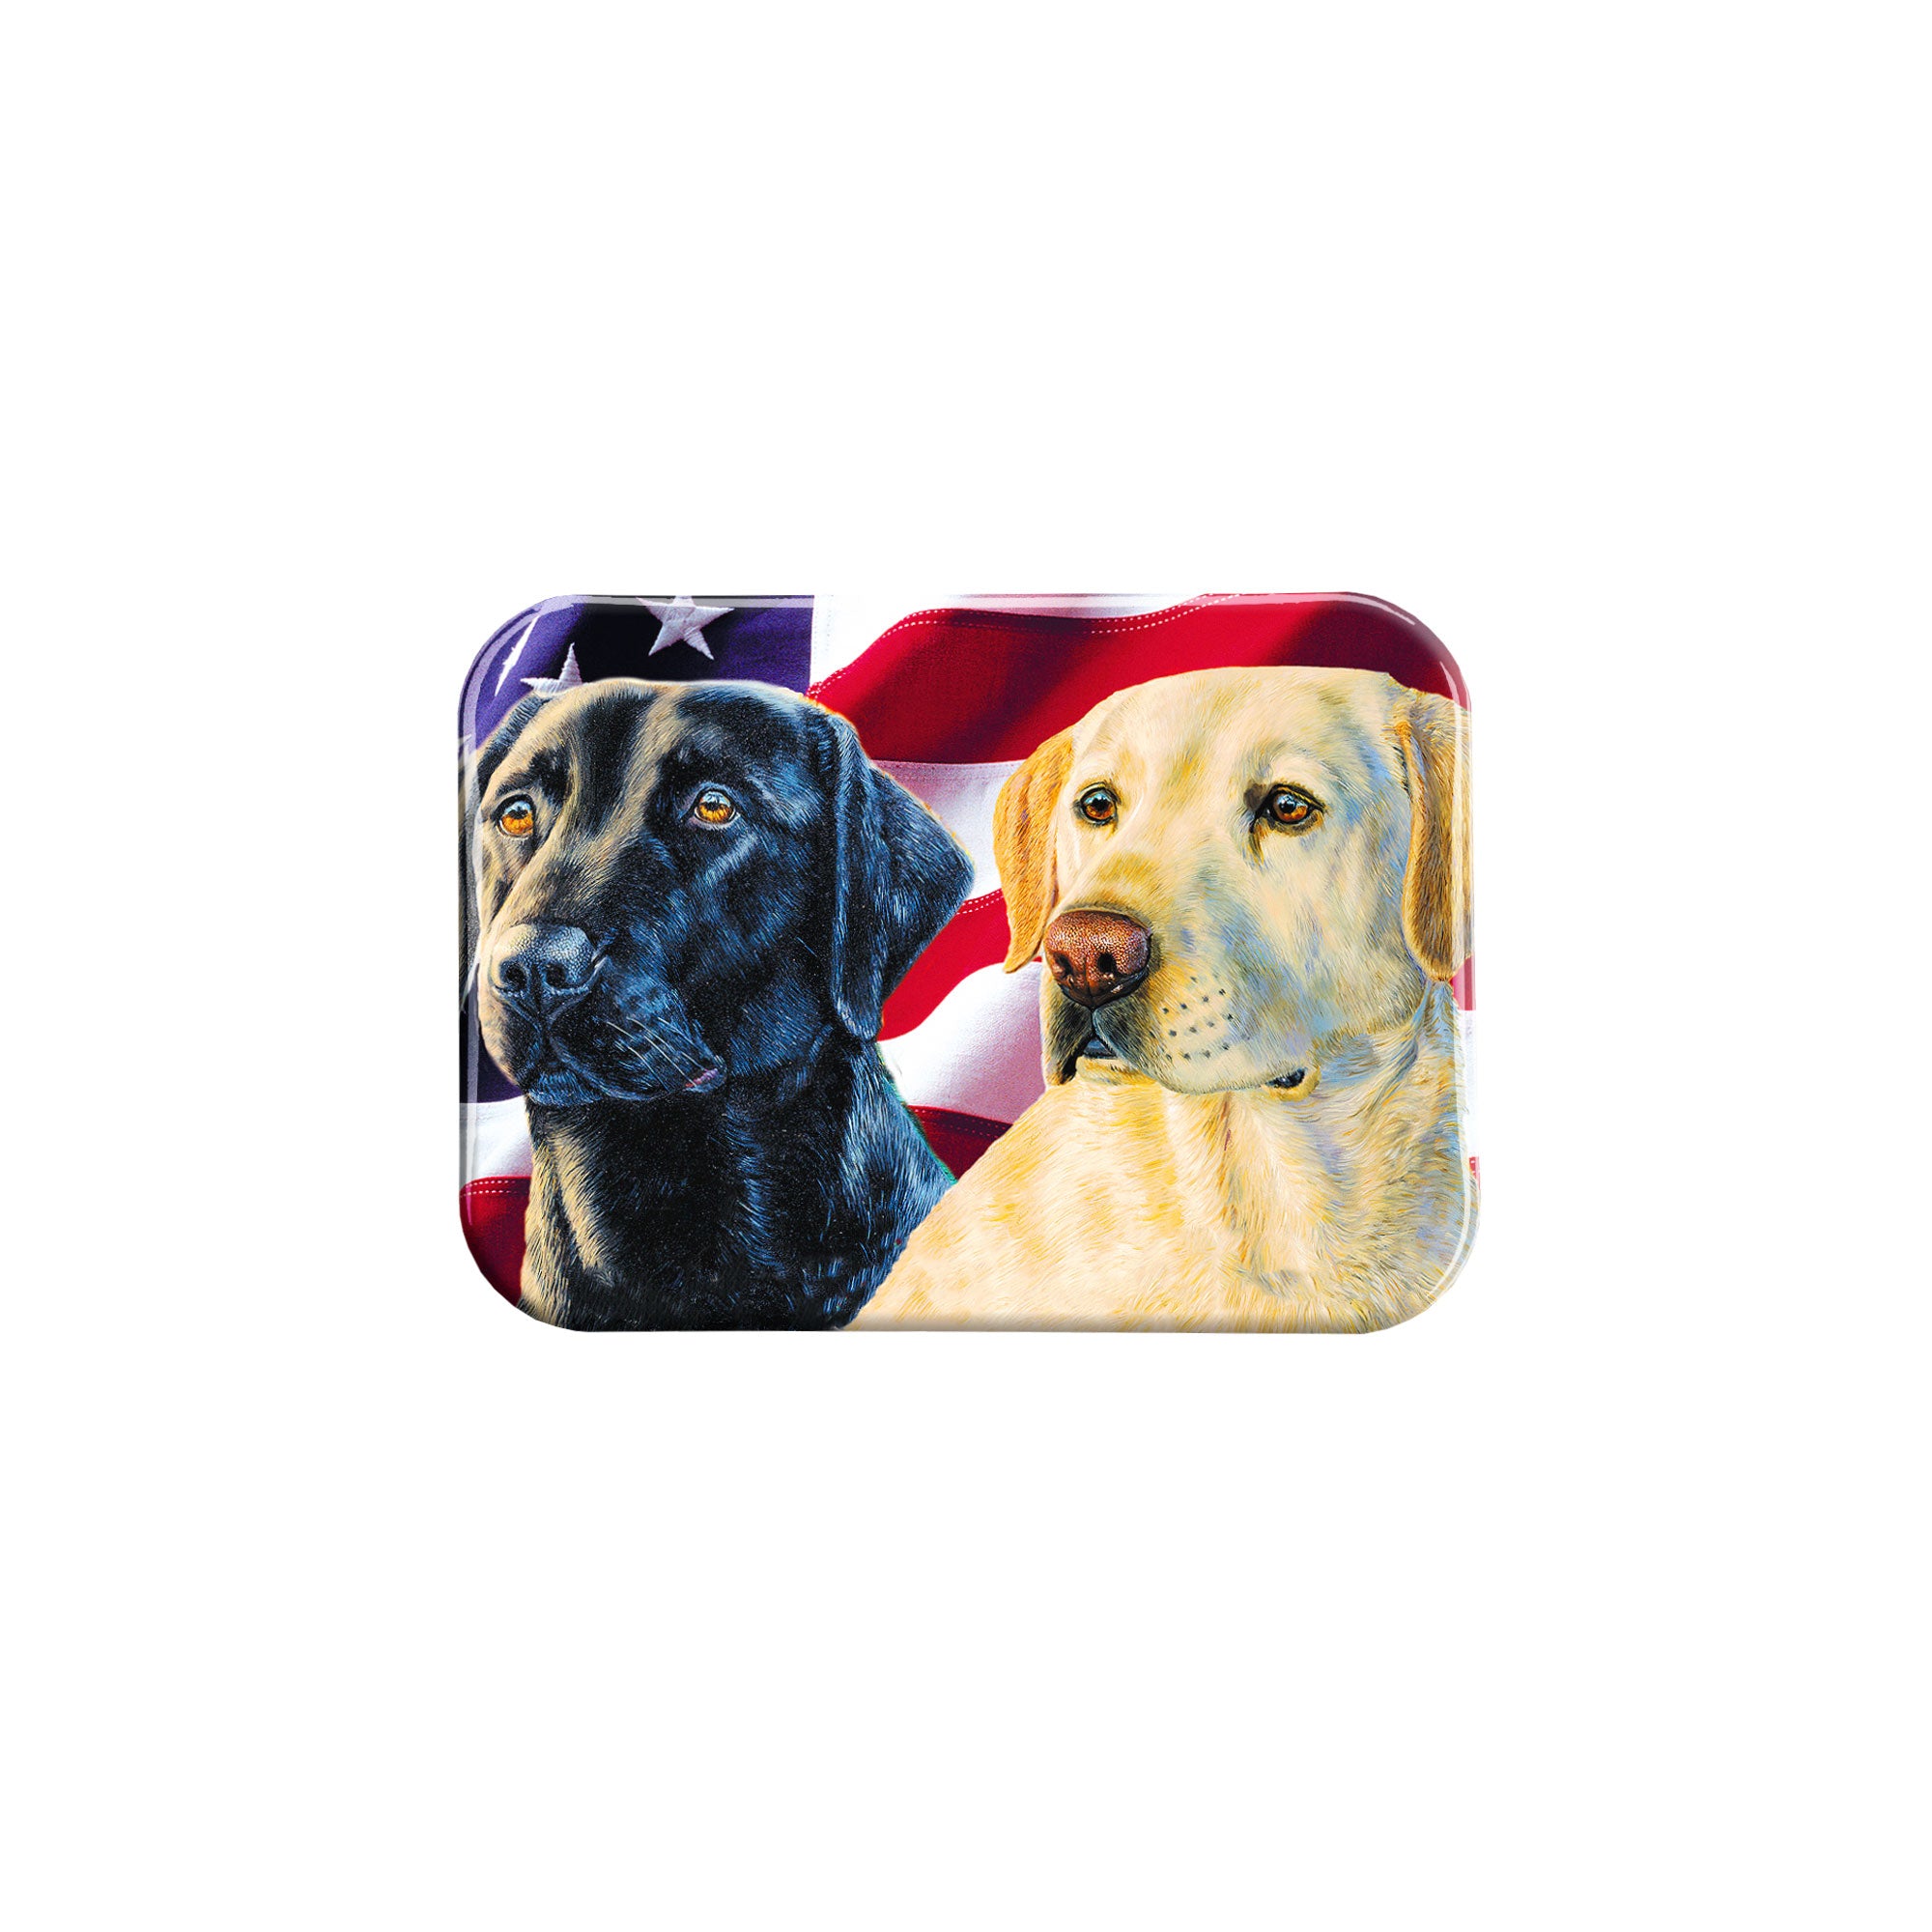 "American Black and Yellow Lab" - 2.5" X 3.5" Rectangle Fridge Magnets